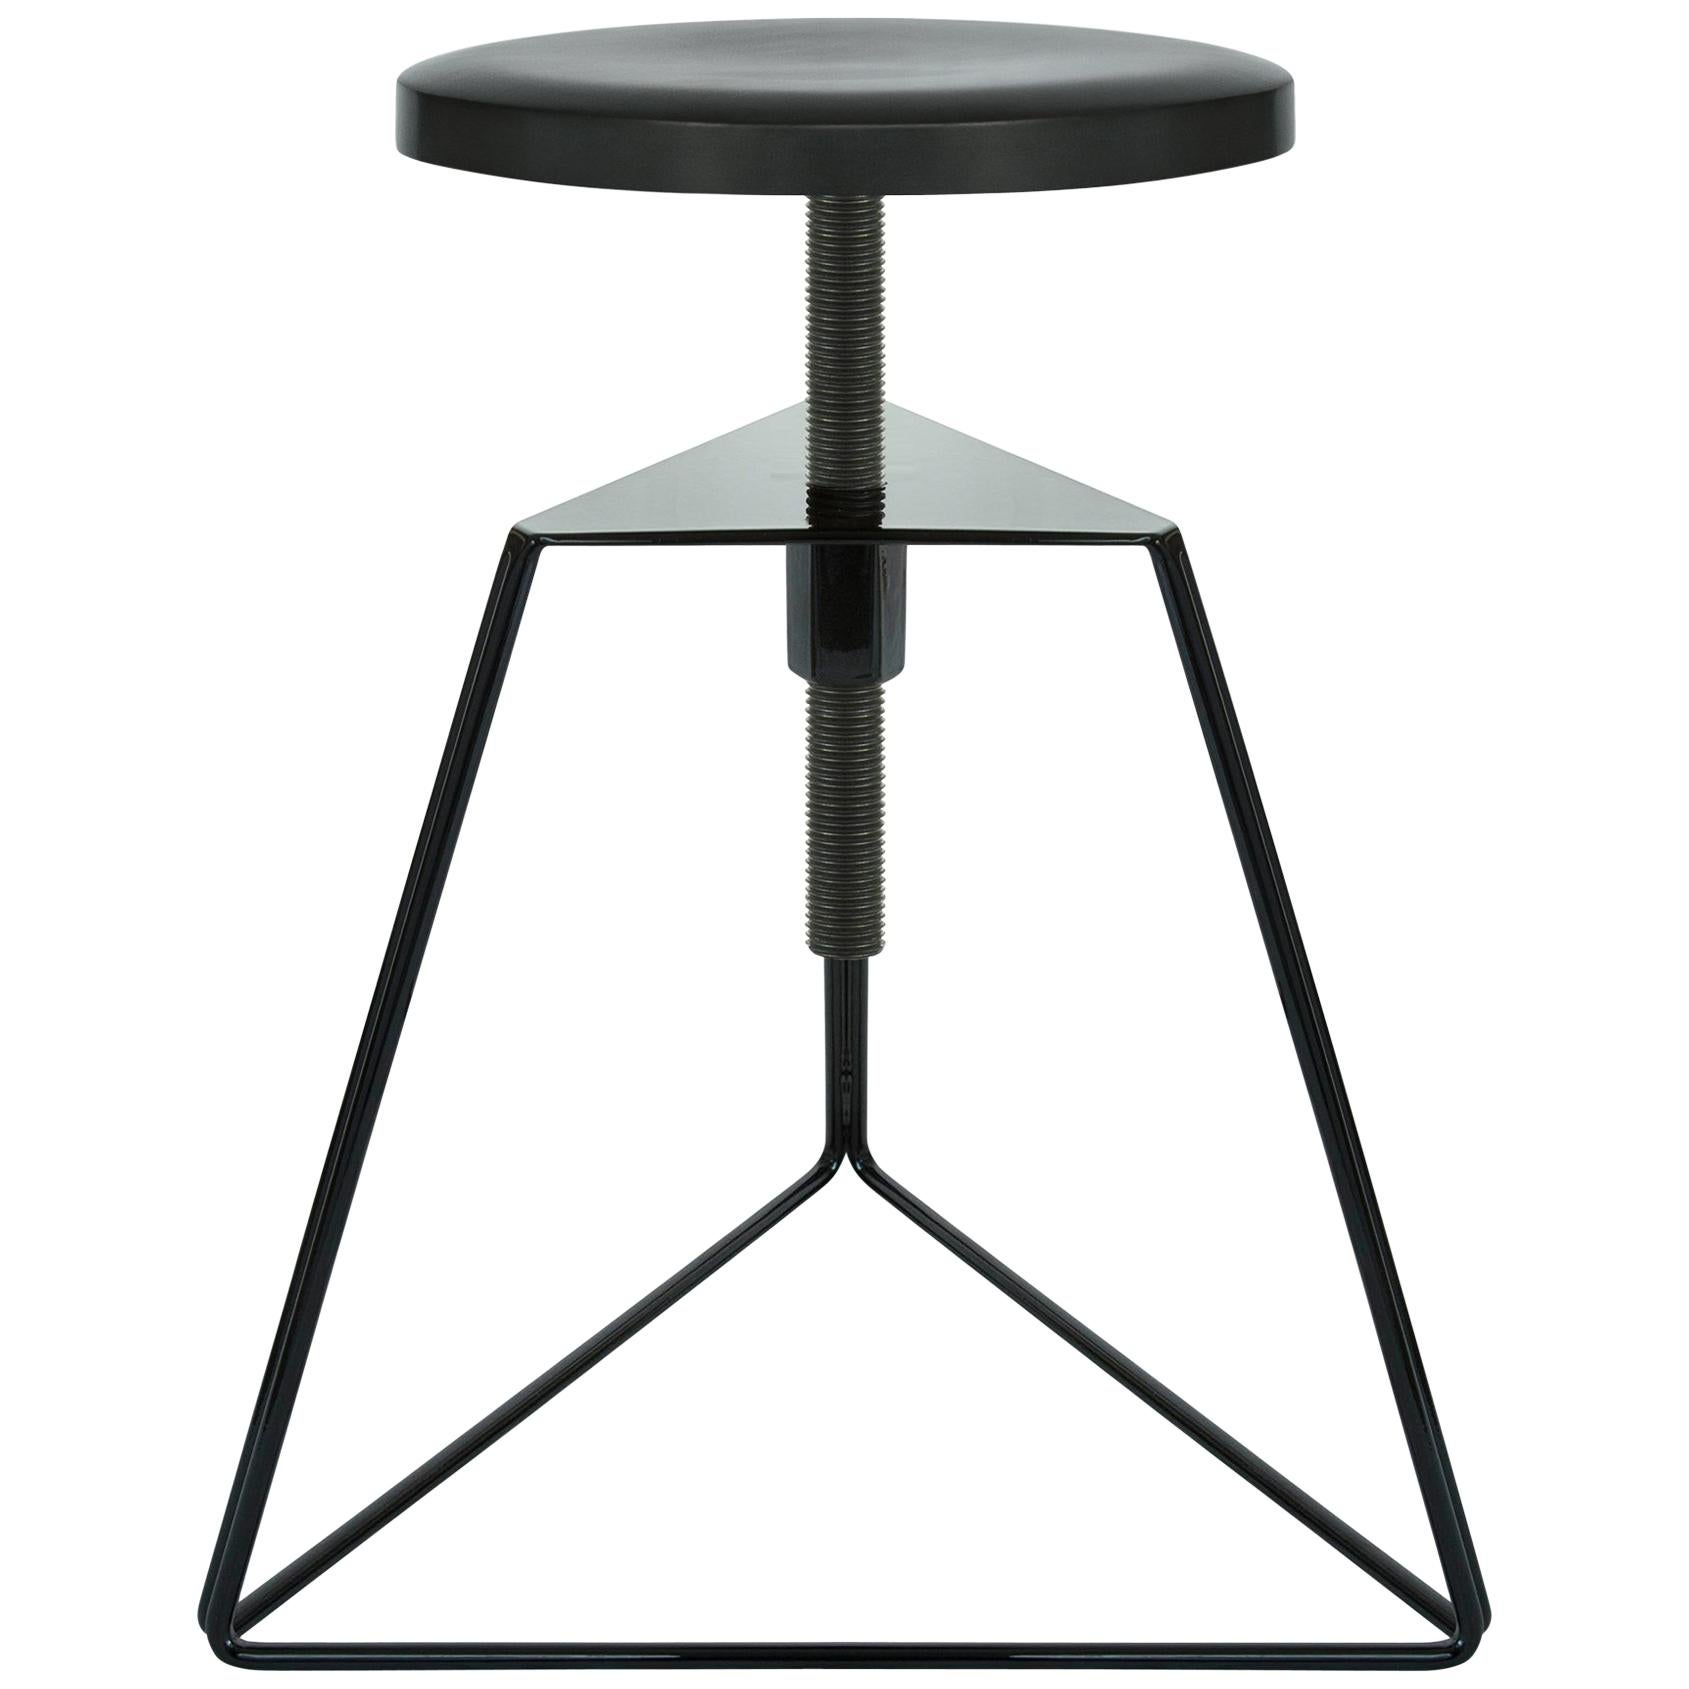 The Camp Stool, Black and Charcoal, Adjustable Height Low Stool For Sale